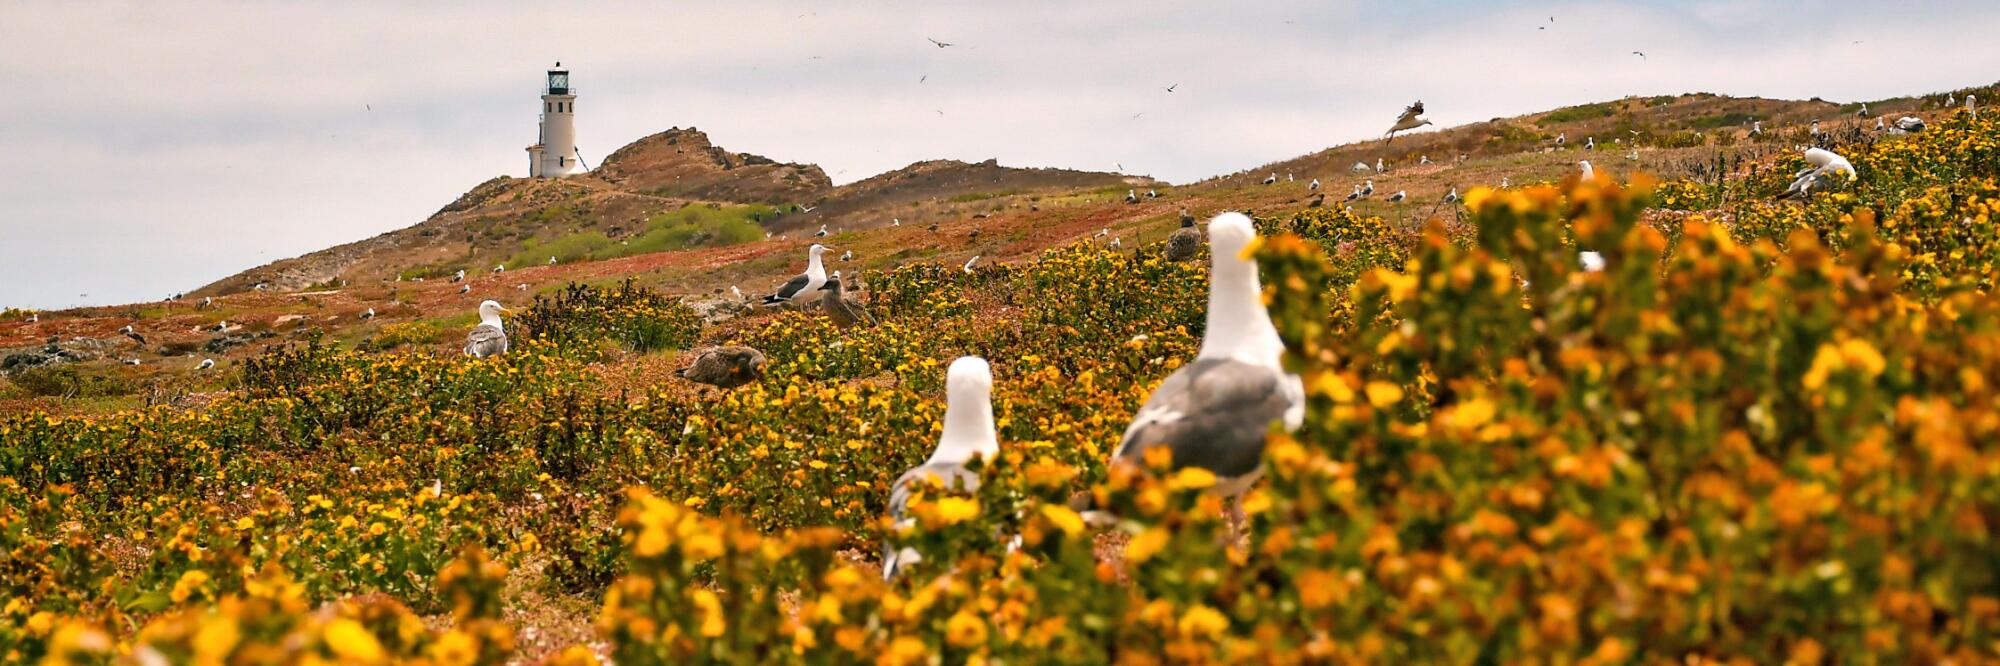 Birds and flowers on a field at Anacapa Island, Channel Islands National Park, with a lighthouse in the background